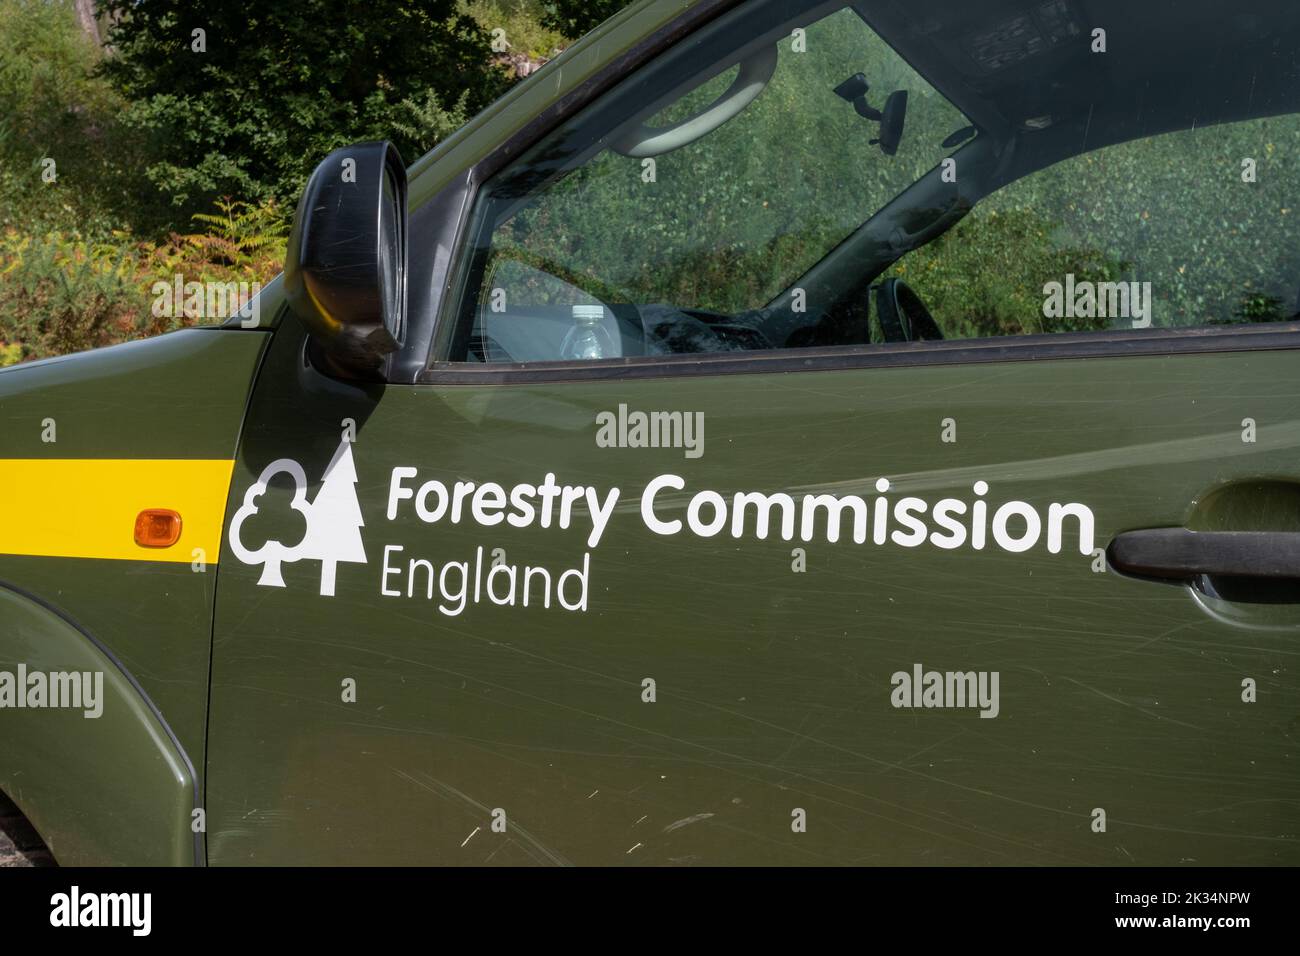 Forestry Commission England logo on pickup truck vehicle in the countryside, England, UK Stock Photo